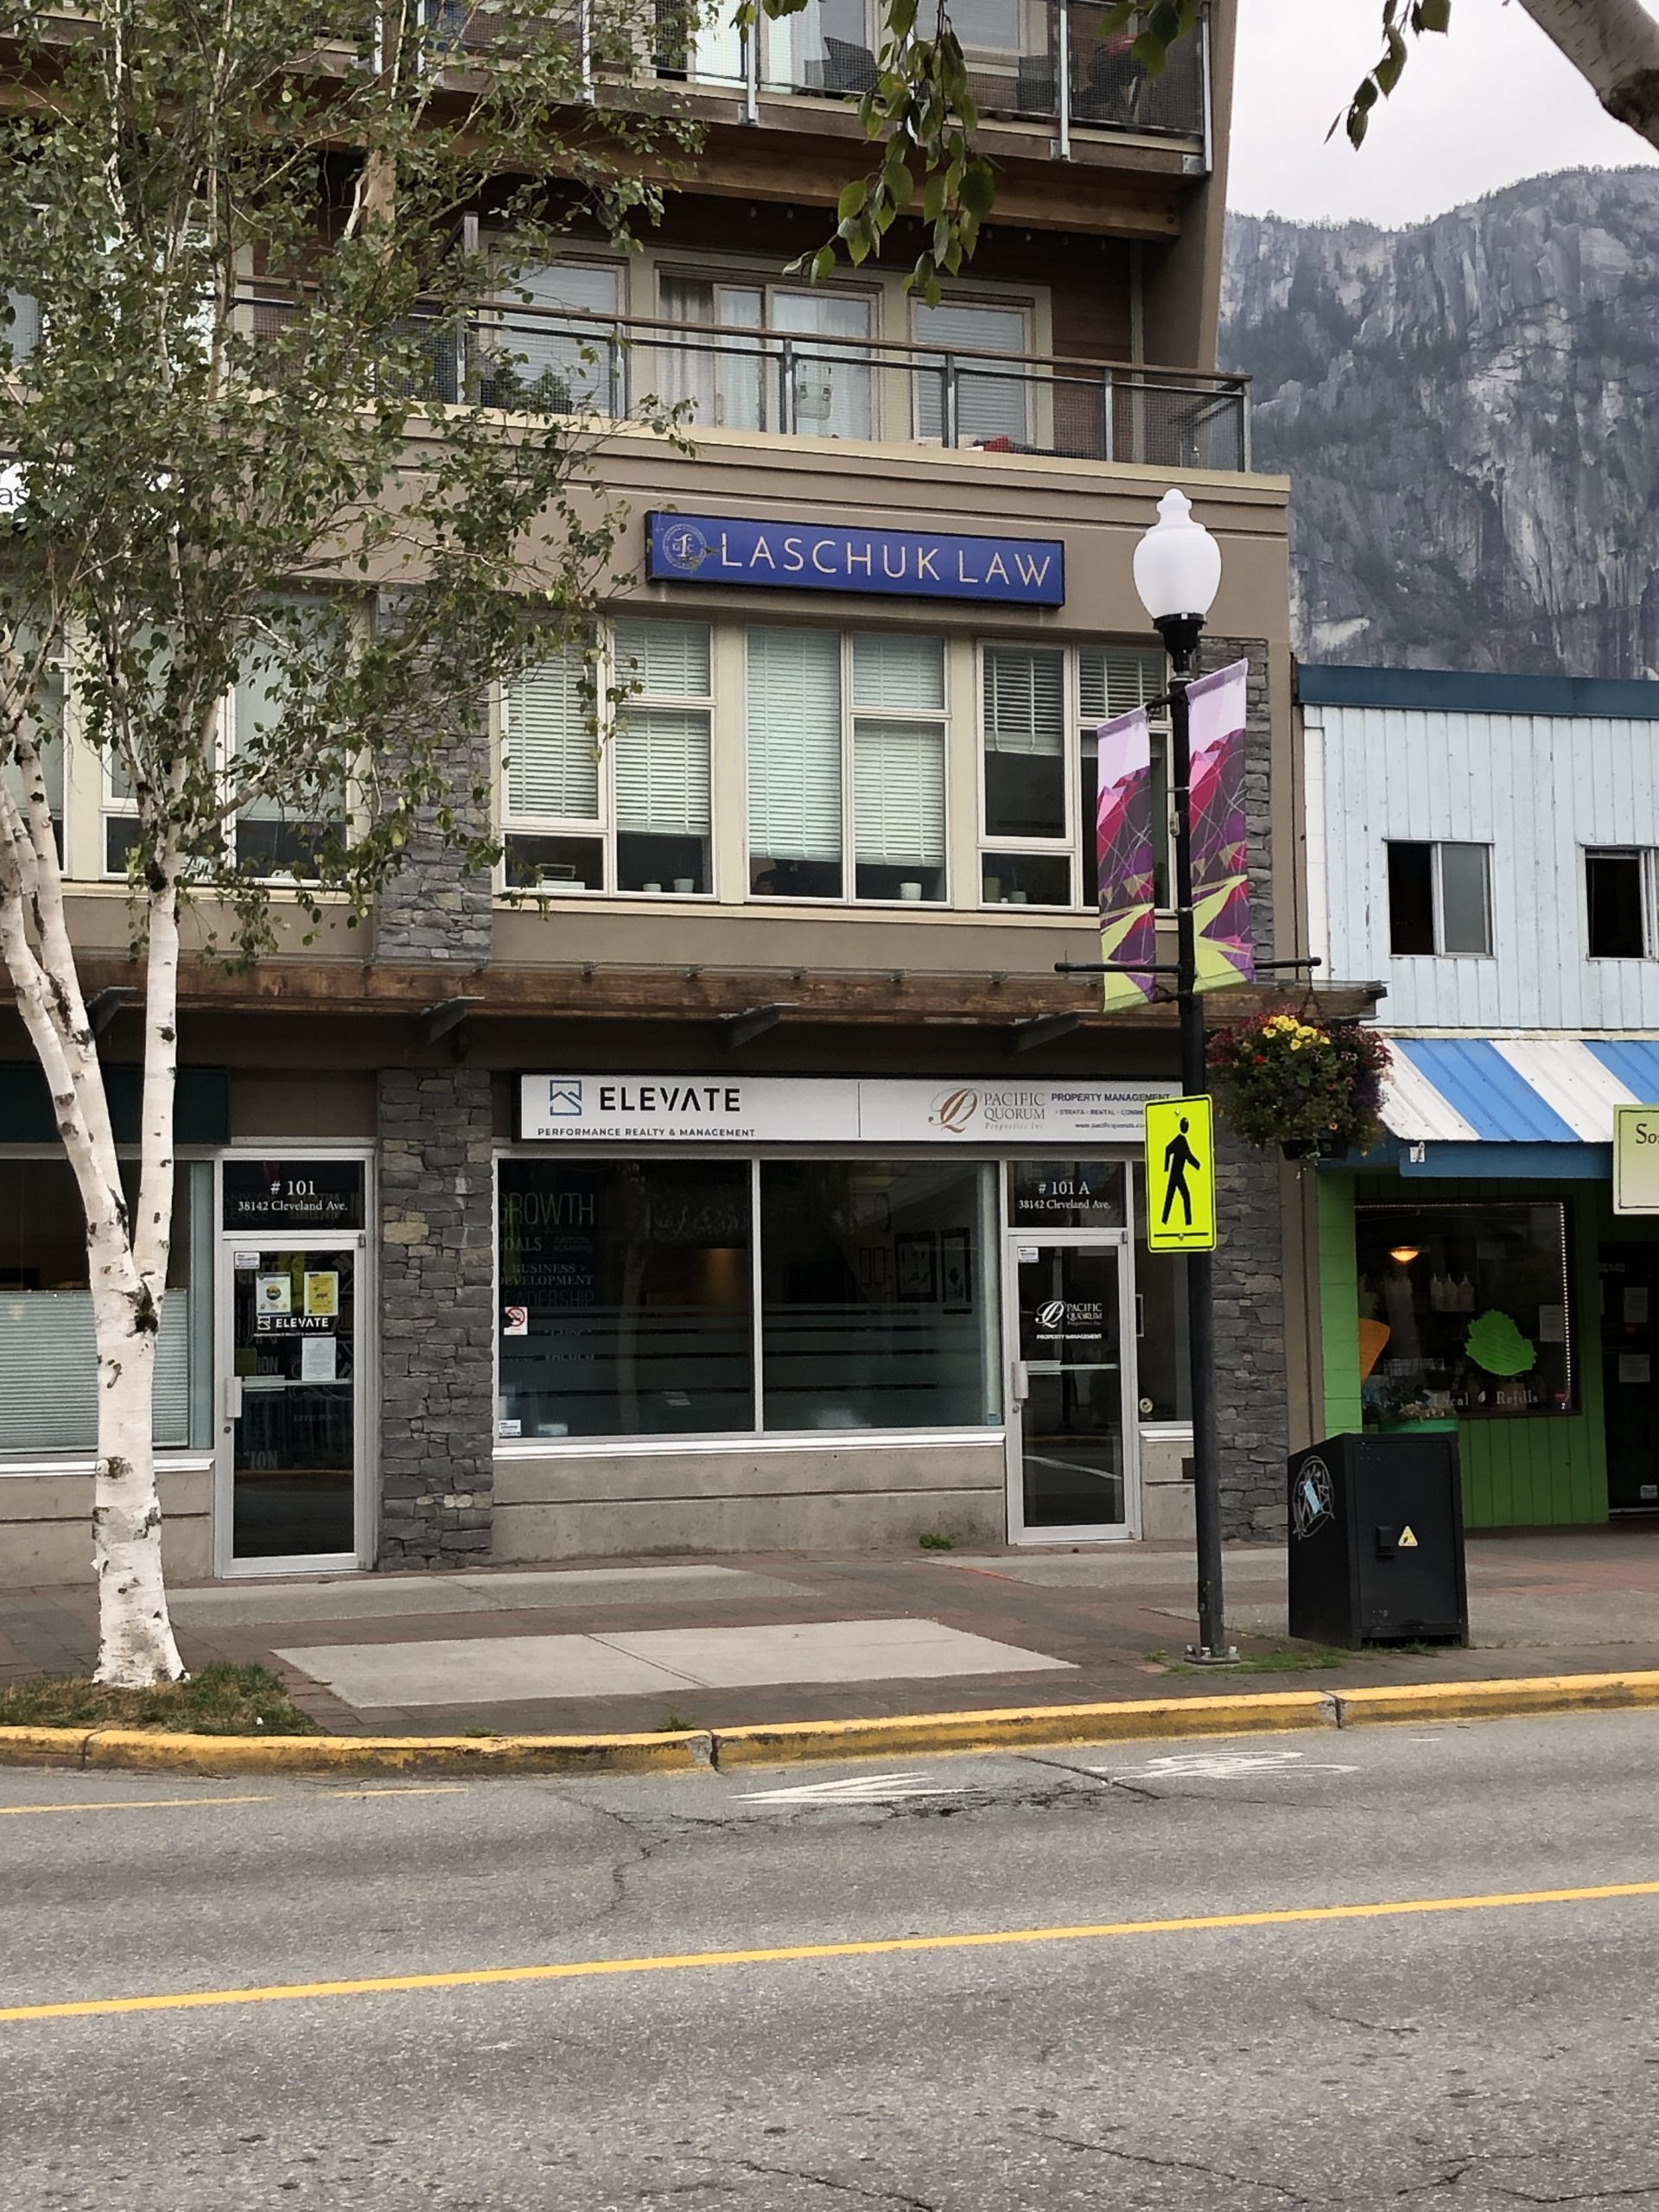 https://www.downtownsquamish.com/wp-content/uploads/2022/04/Laschuk-Law-1-scaled.jpg